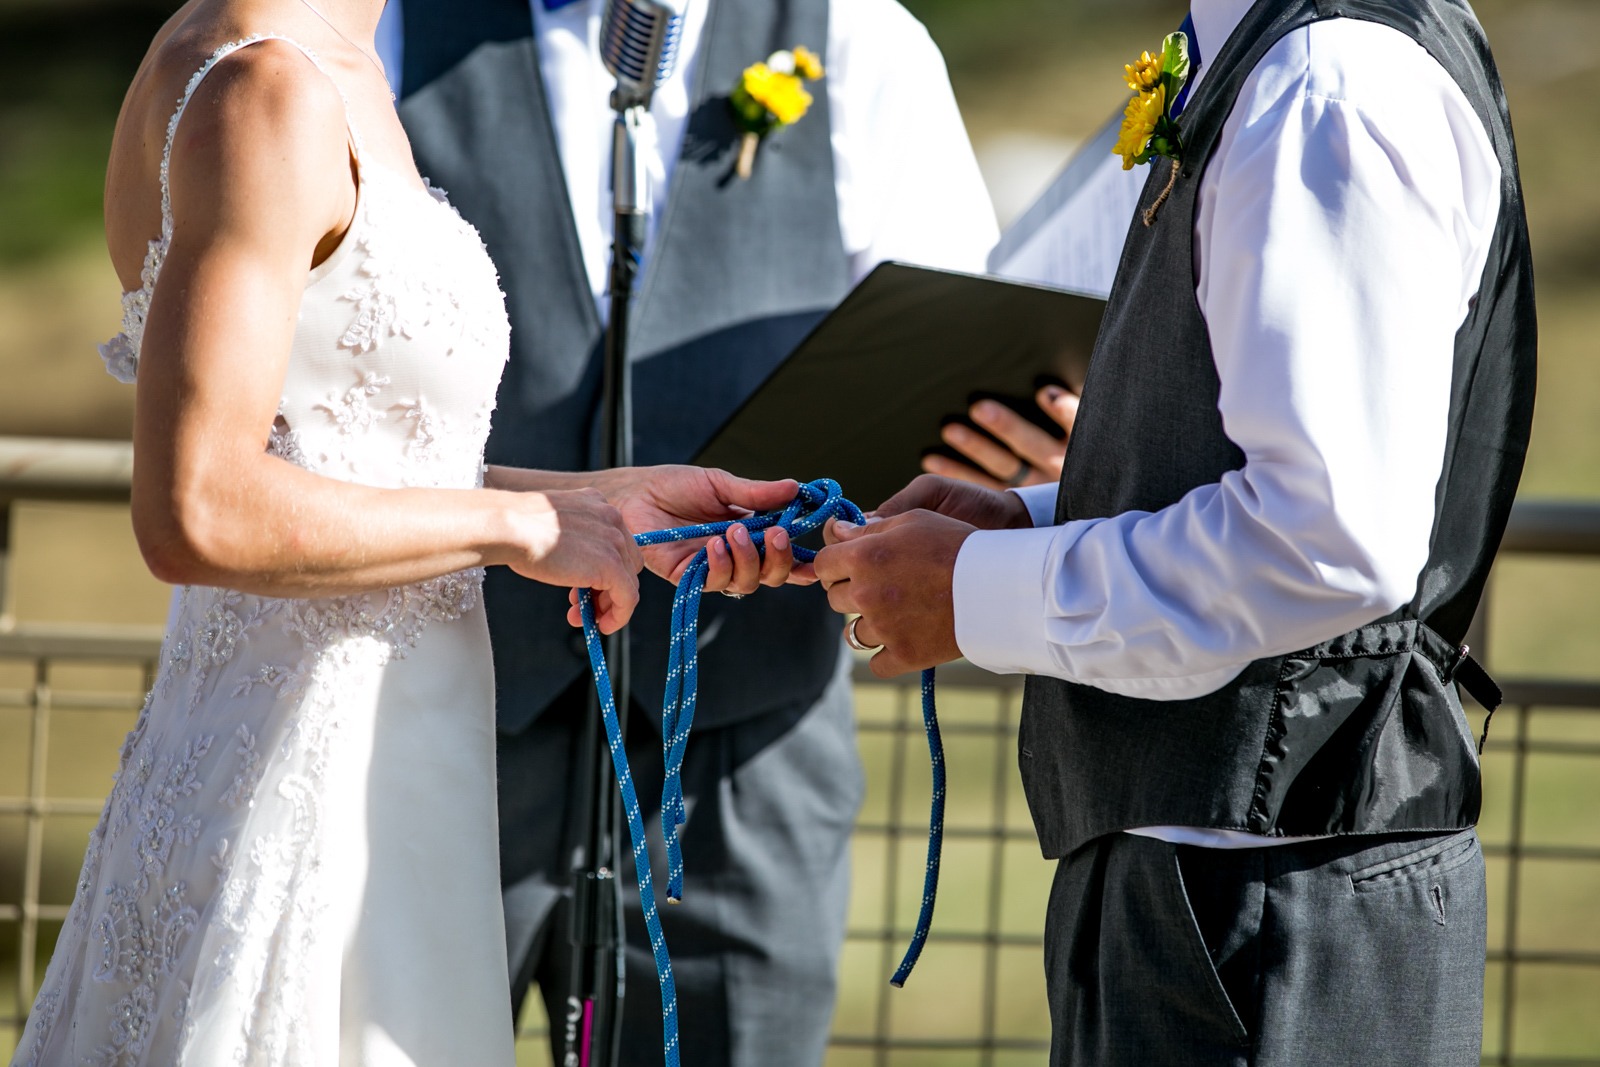 the ands of a bride and groom as they tie knots in blue rope